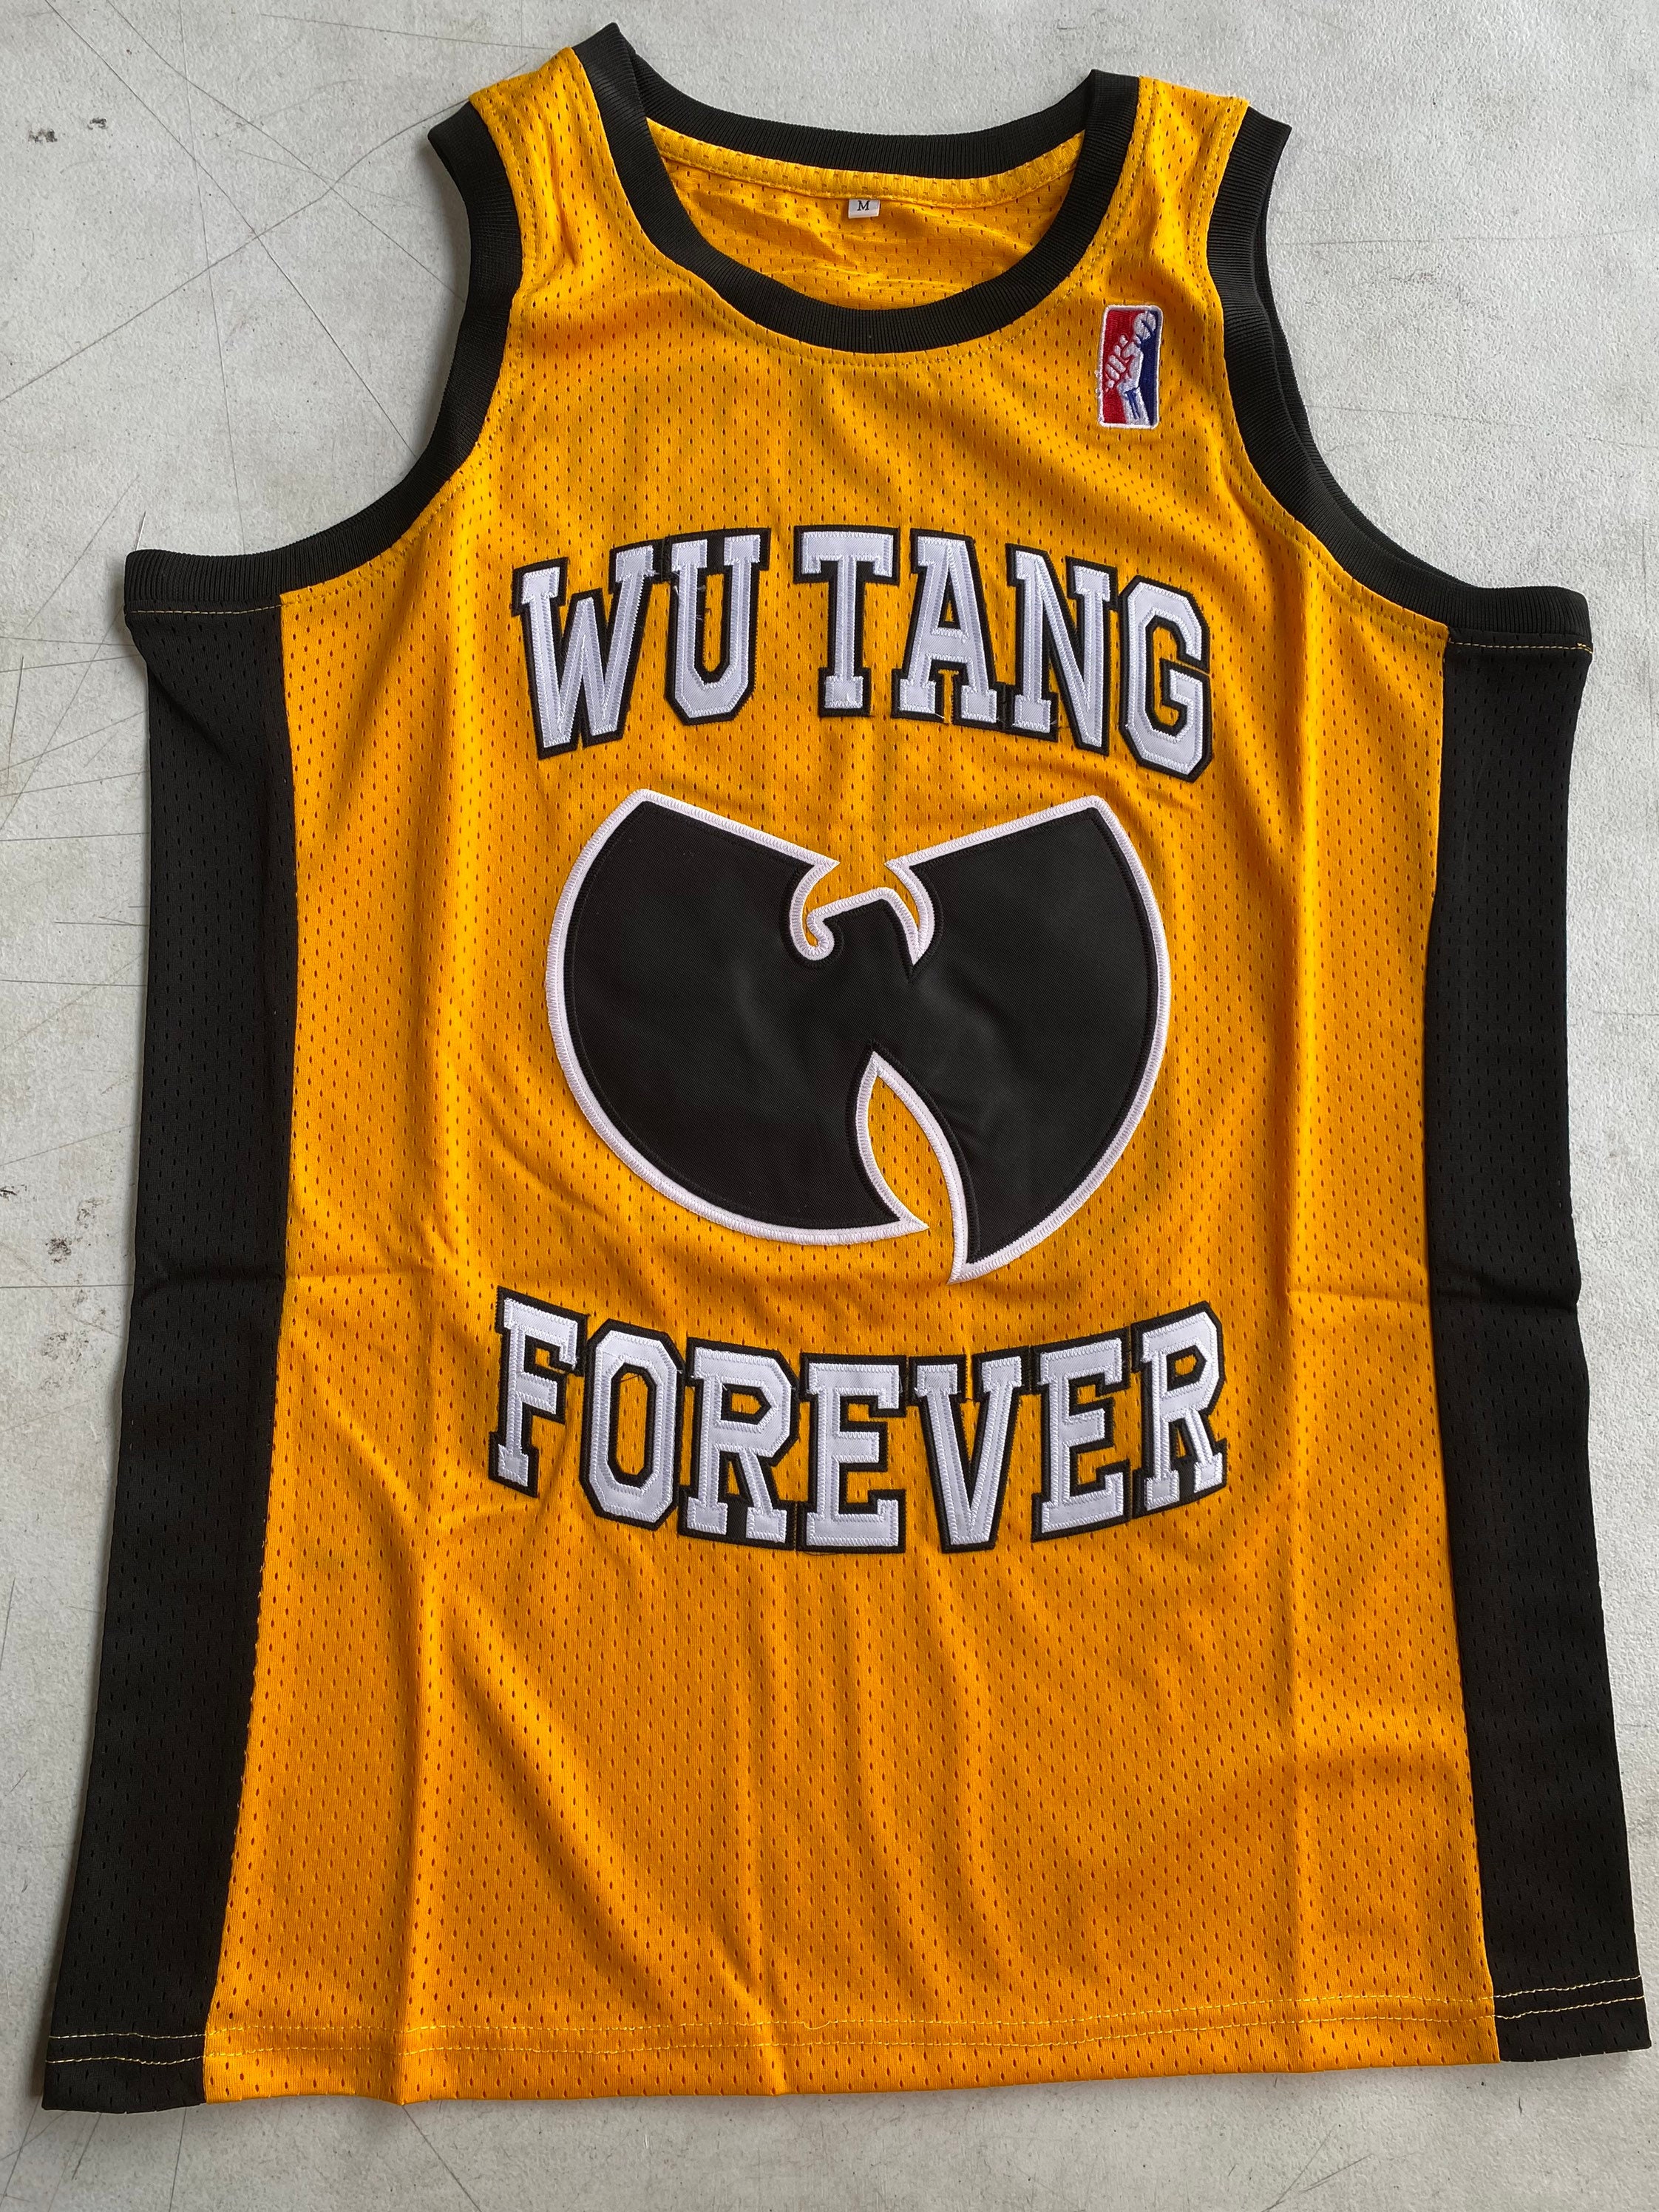 CAIYOO Mens #14 Basketball Jersey 90S Hip Hop Clothing for Party Stitched Letters and Numbers S-3XL 